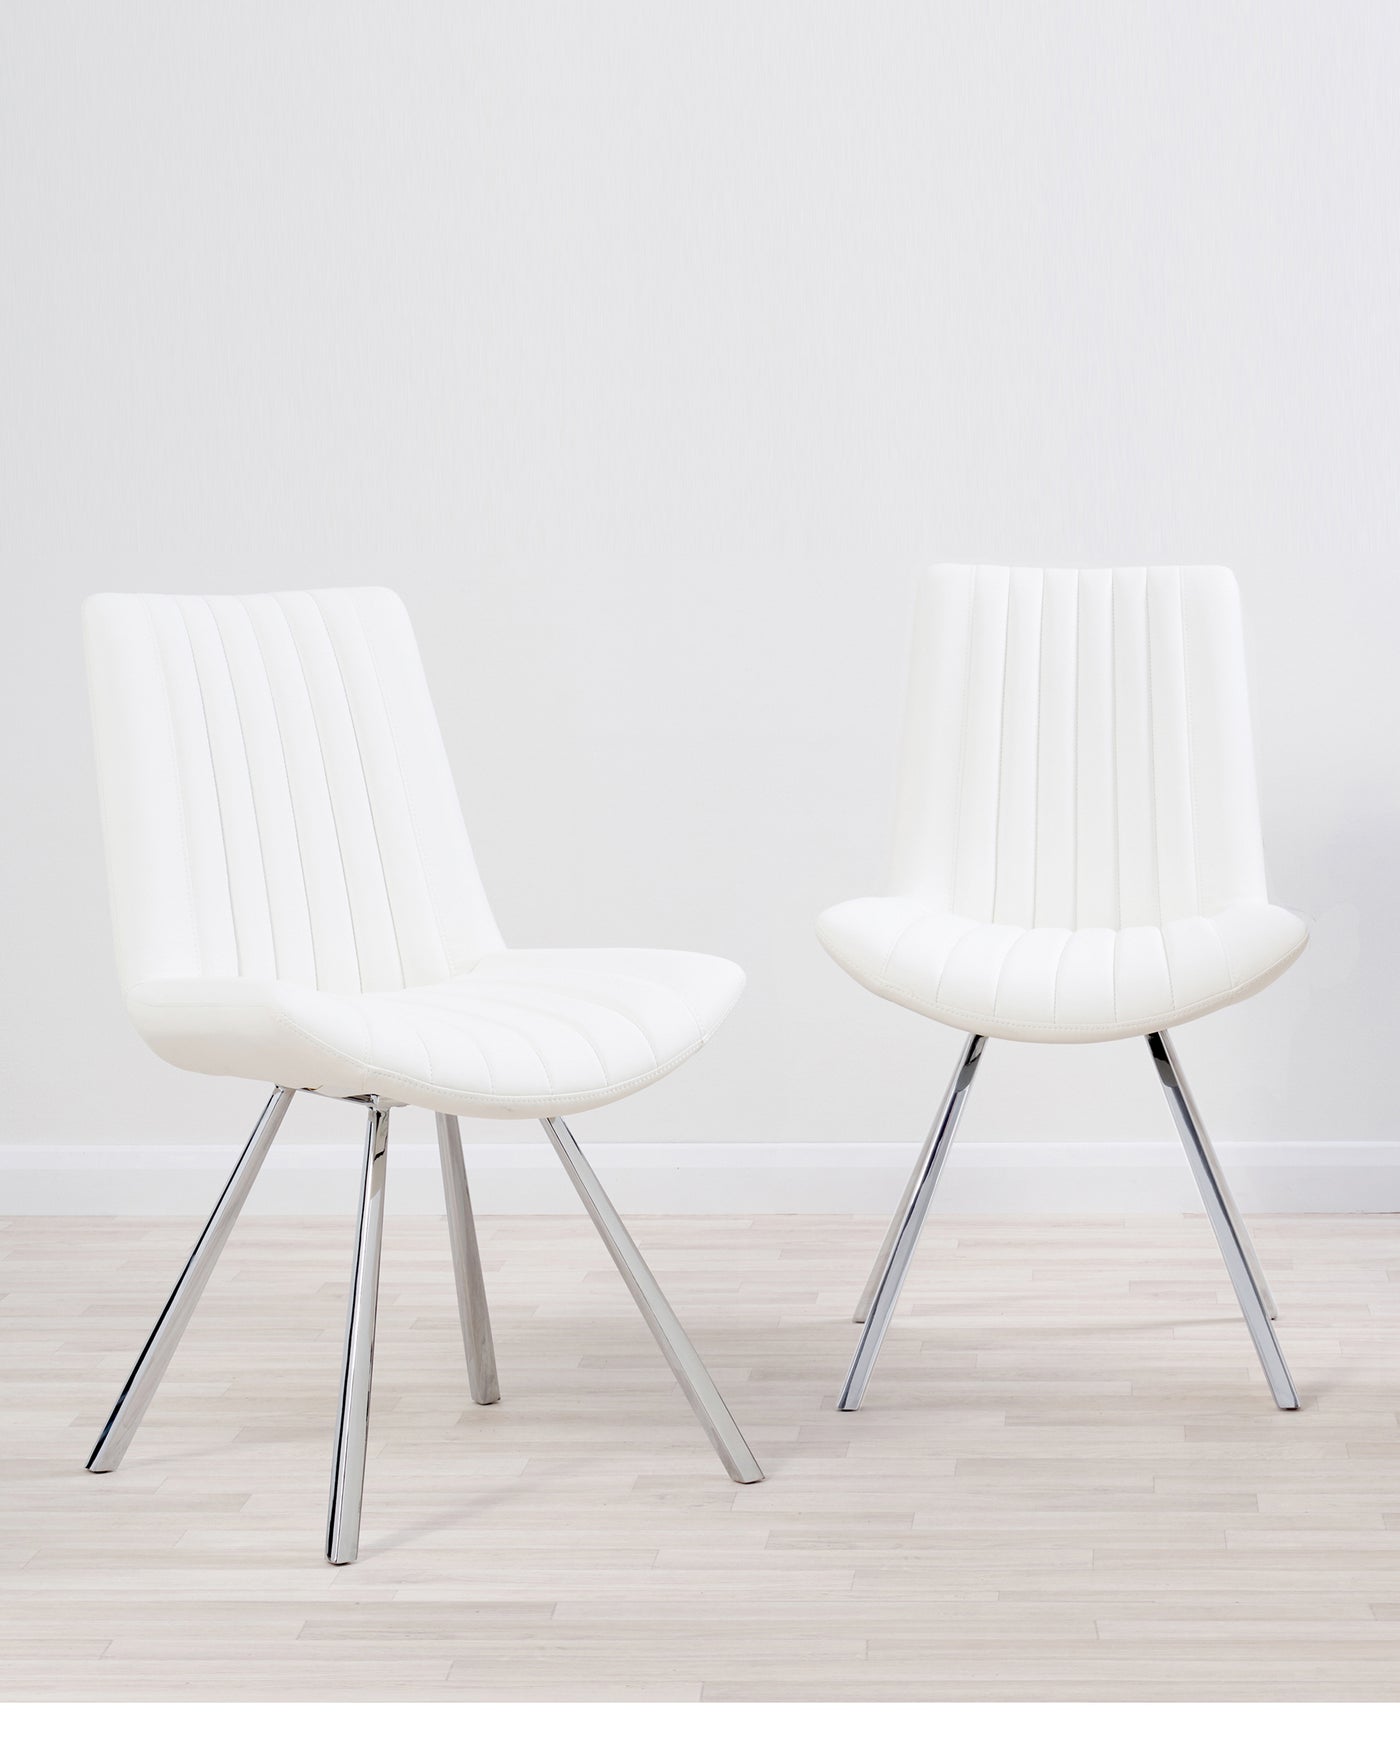 Two contemporary white upholstered dining chairs with vertical stitching detail on the backrest and seat cushion, set on sleek, angled chrome legs.